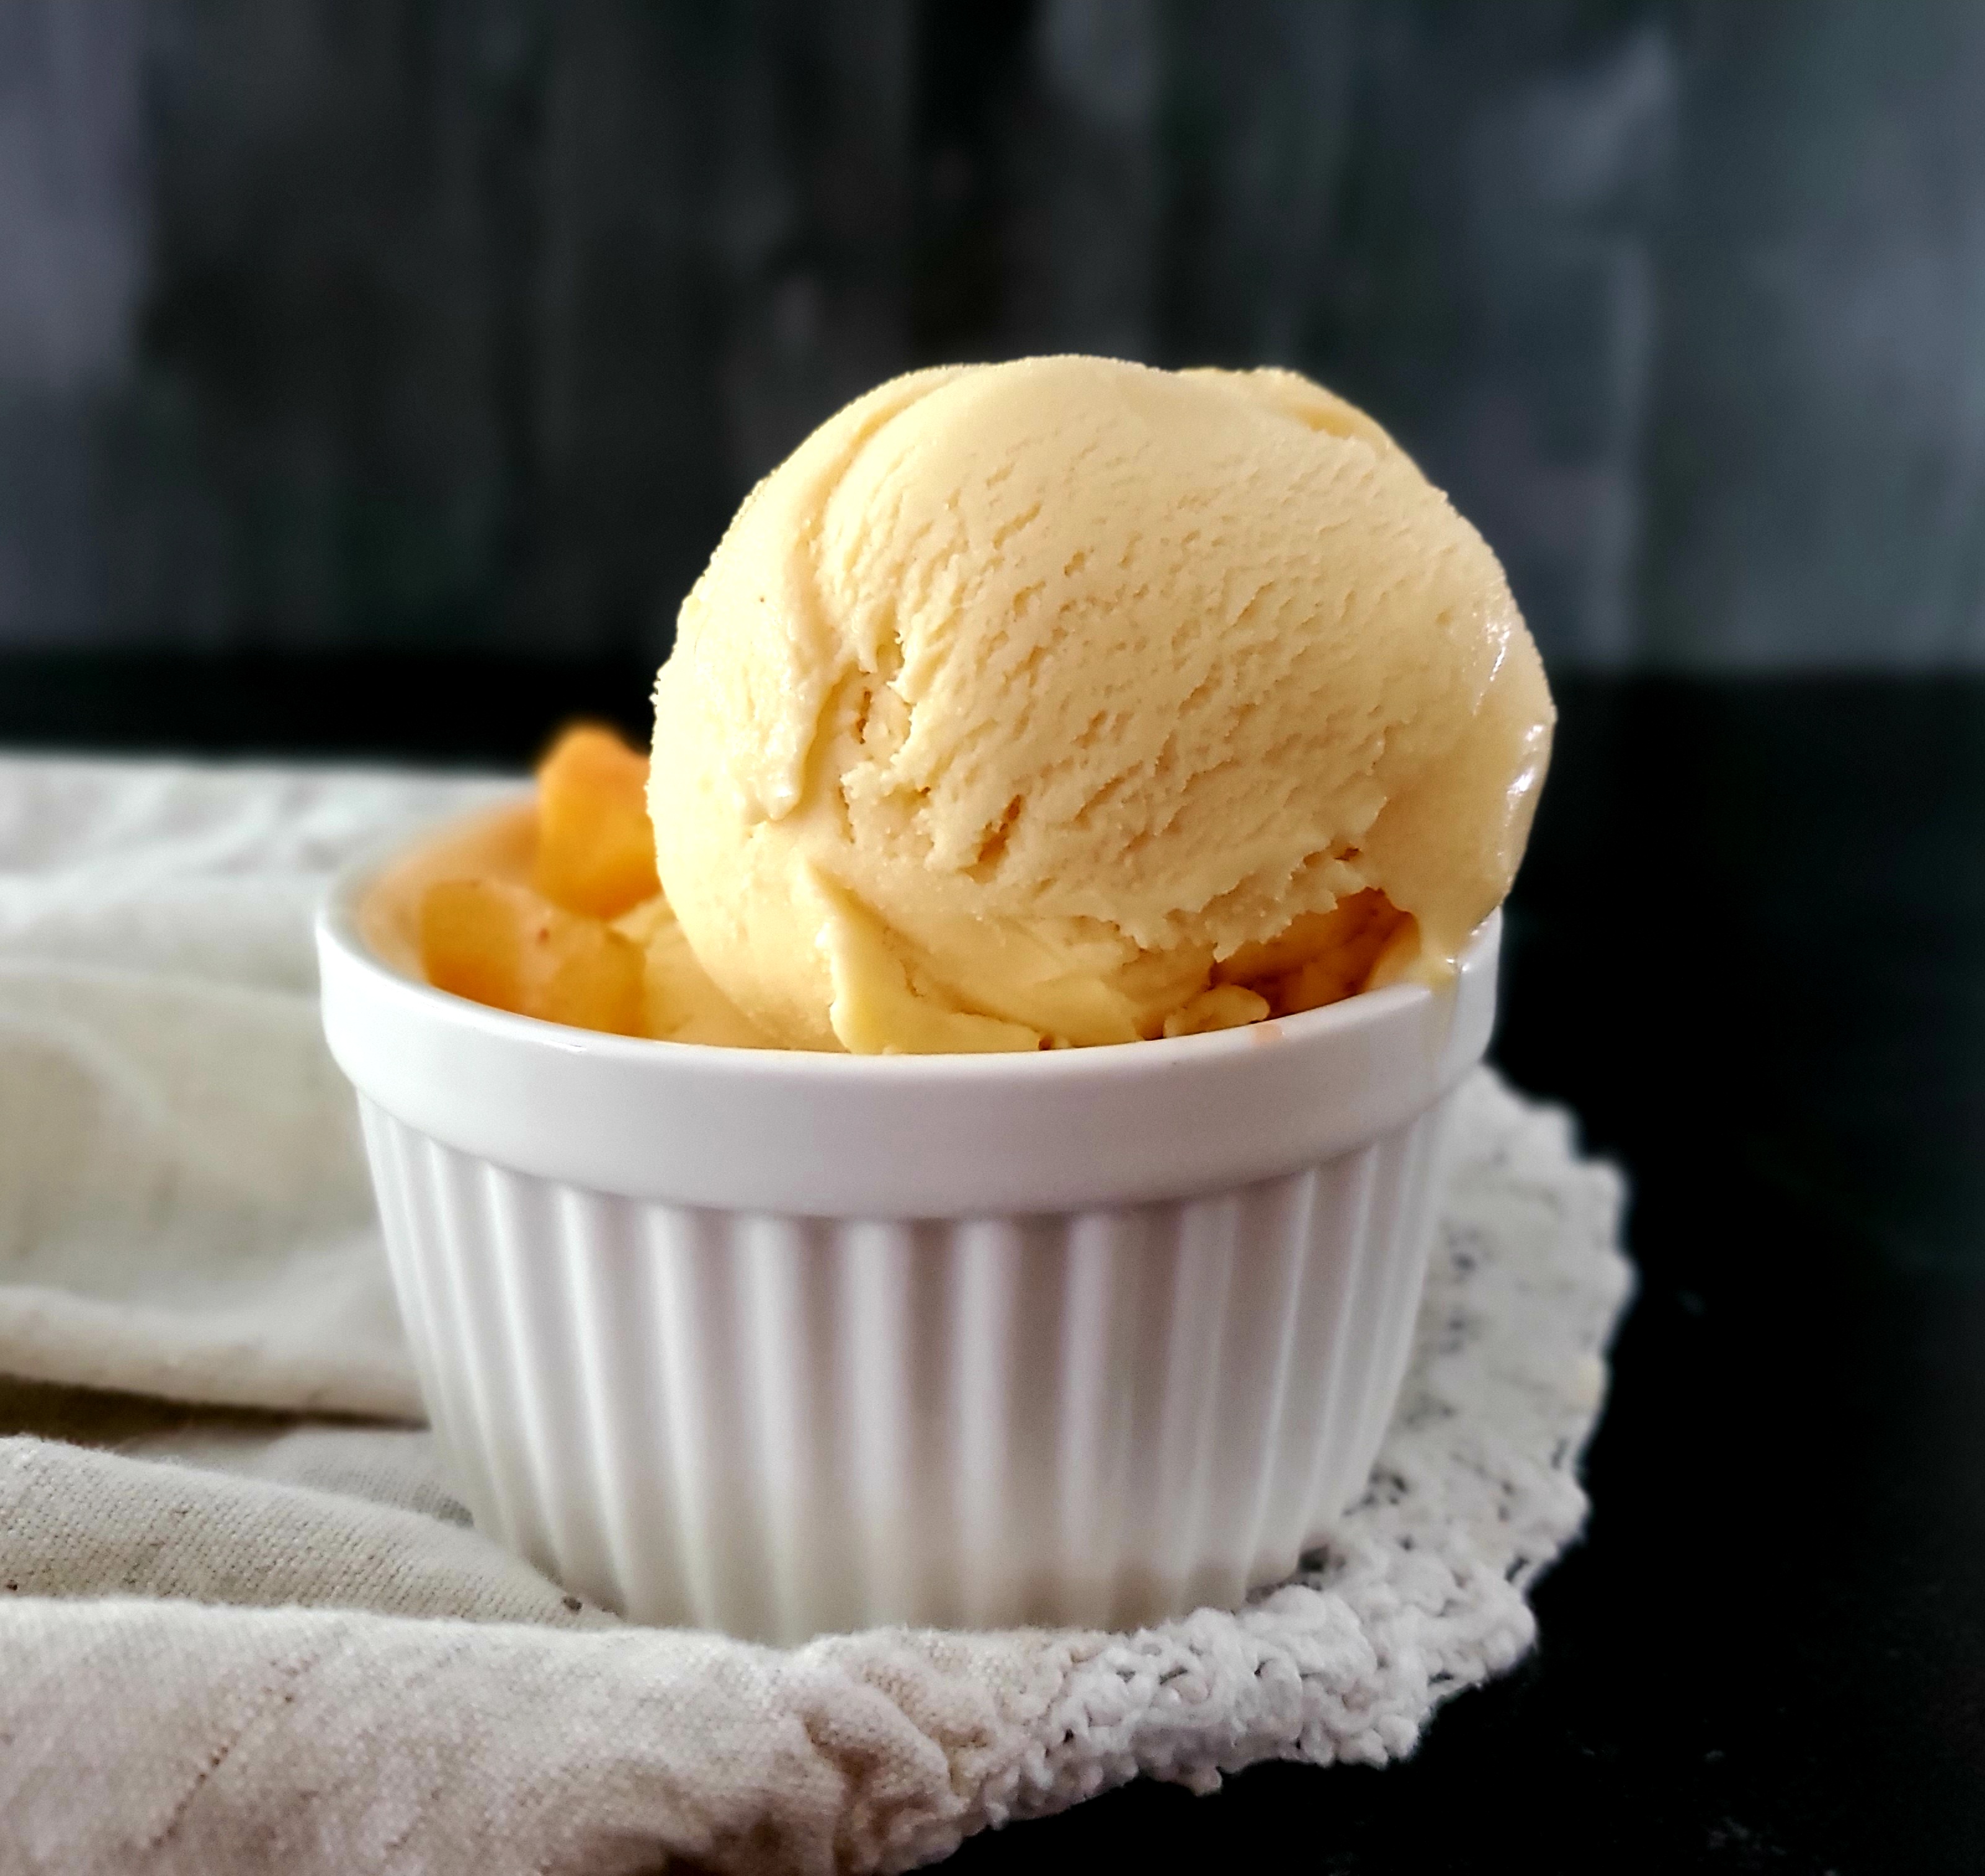 Peach Ice Cream (Recipe Inspired by THE SOUTHERN BOOK CLUB’S GUIDE TO SLAYING VAMPIRES)